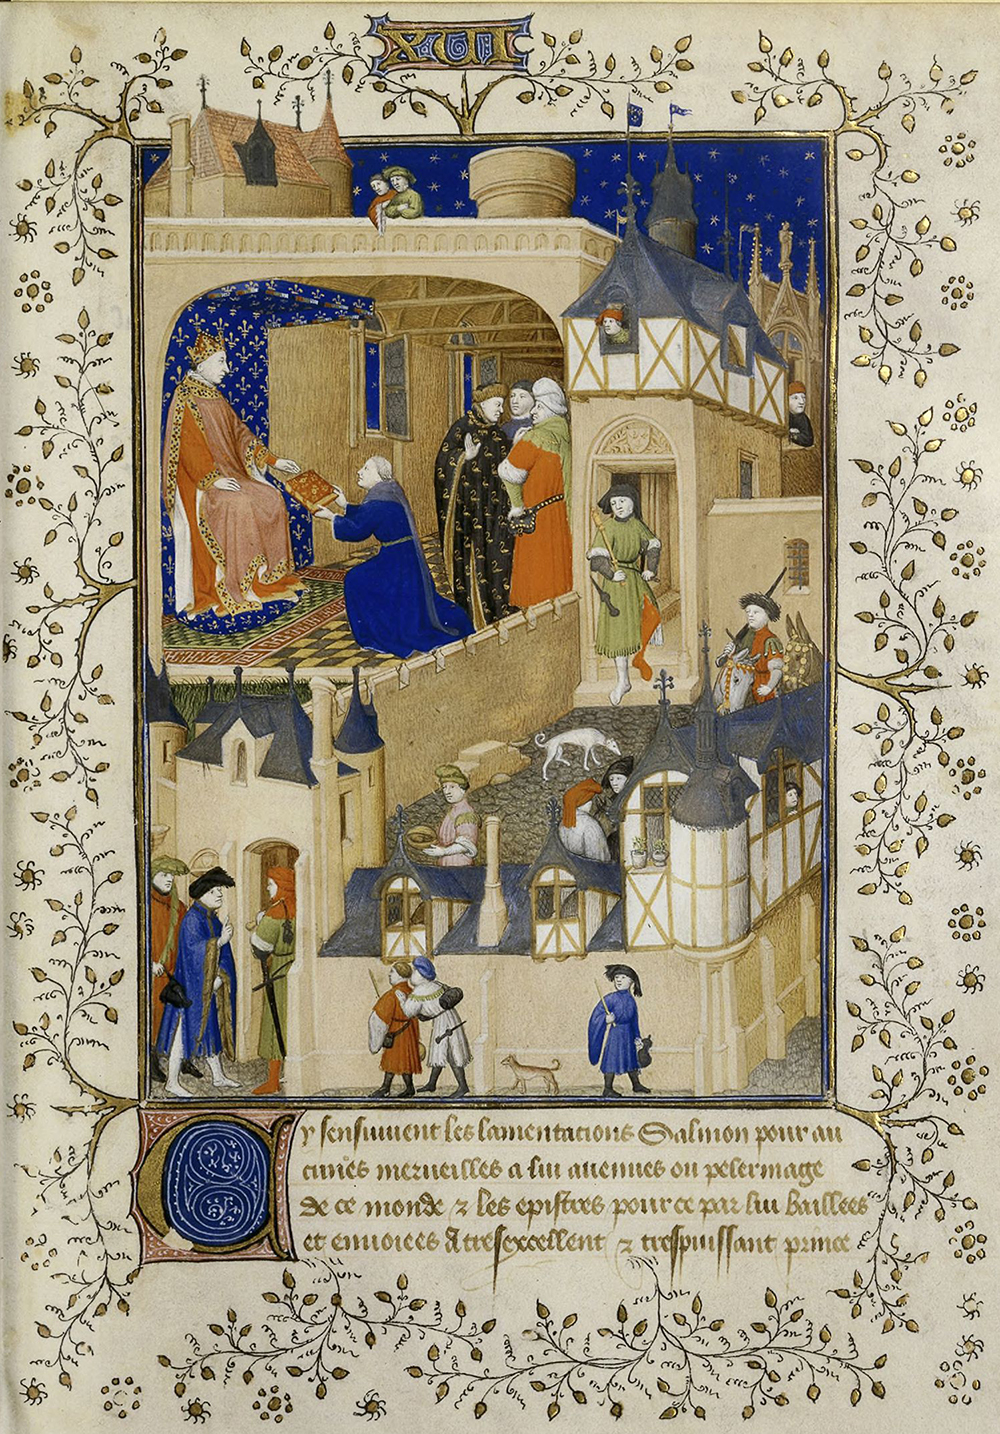 Detail from a 1409 manuscript of Pierre Salmon’s Dialogues, showing the author presenting his work to King Charles VI of France.